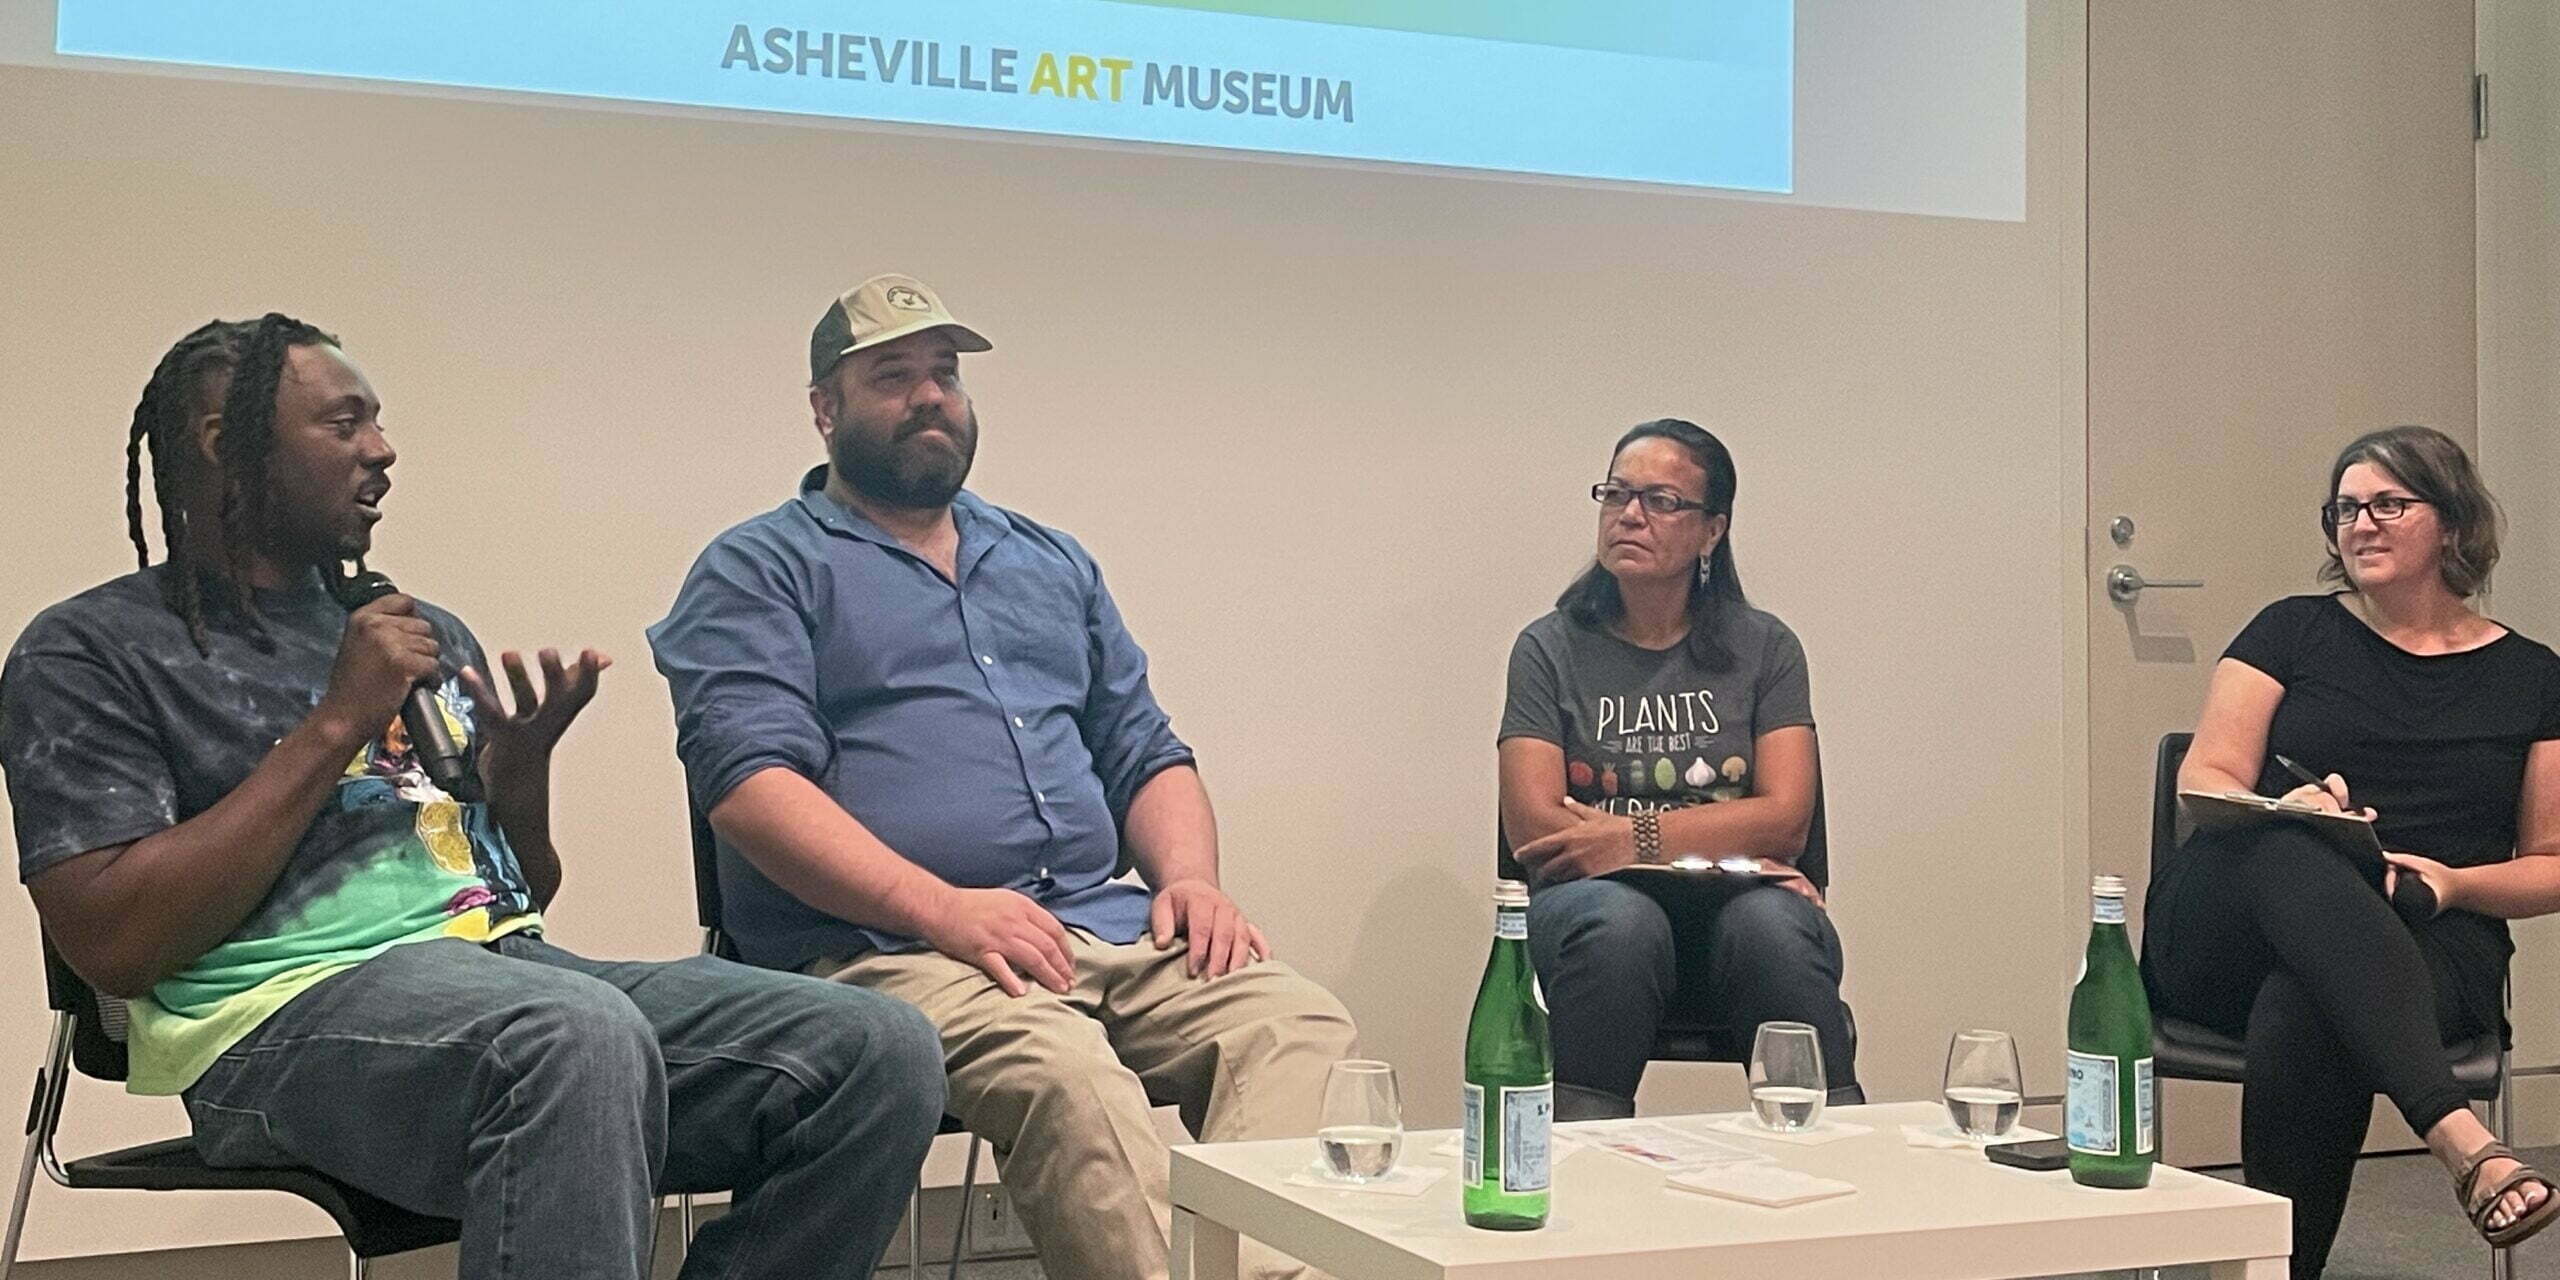 Malcolm Banks, Eric Morris, Delia Jovel and Sarah Hart in a panel discussion on "Appalachian Foodways" at the Asheville Art Museum